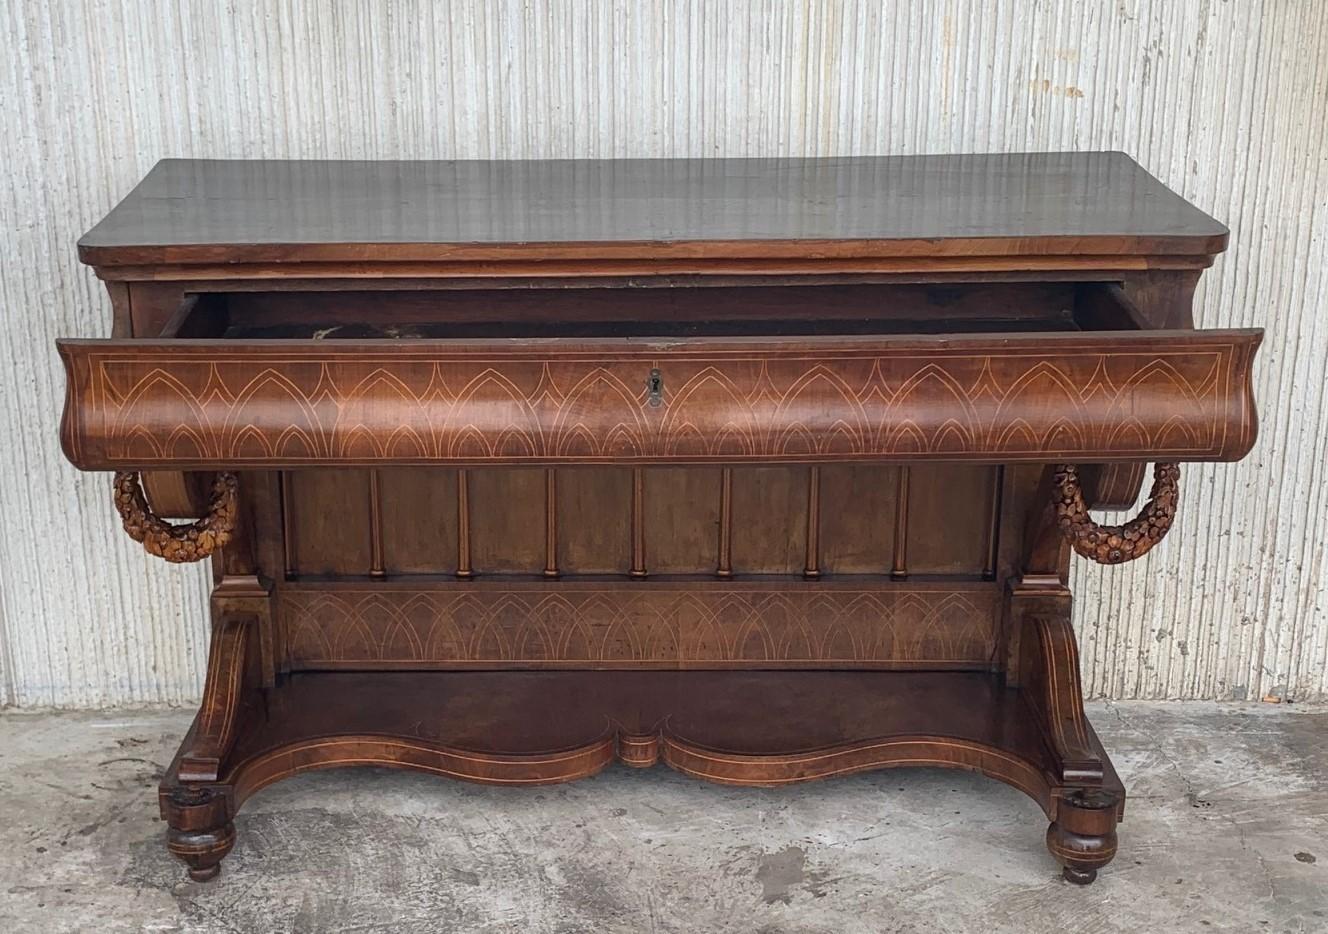 Early Biedermeier Period Walnut Console Table with Drawer, Austria, circa 1830 For Sale 2